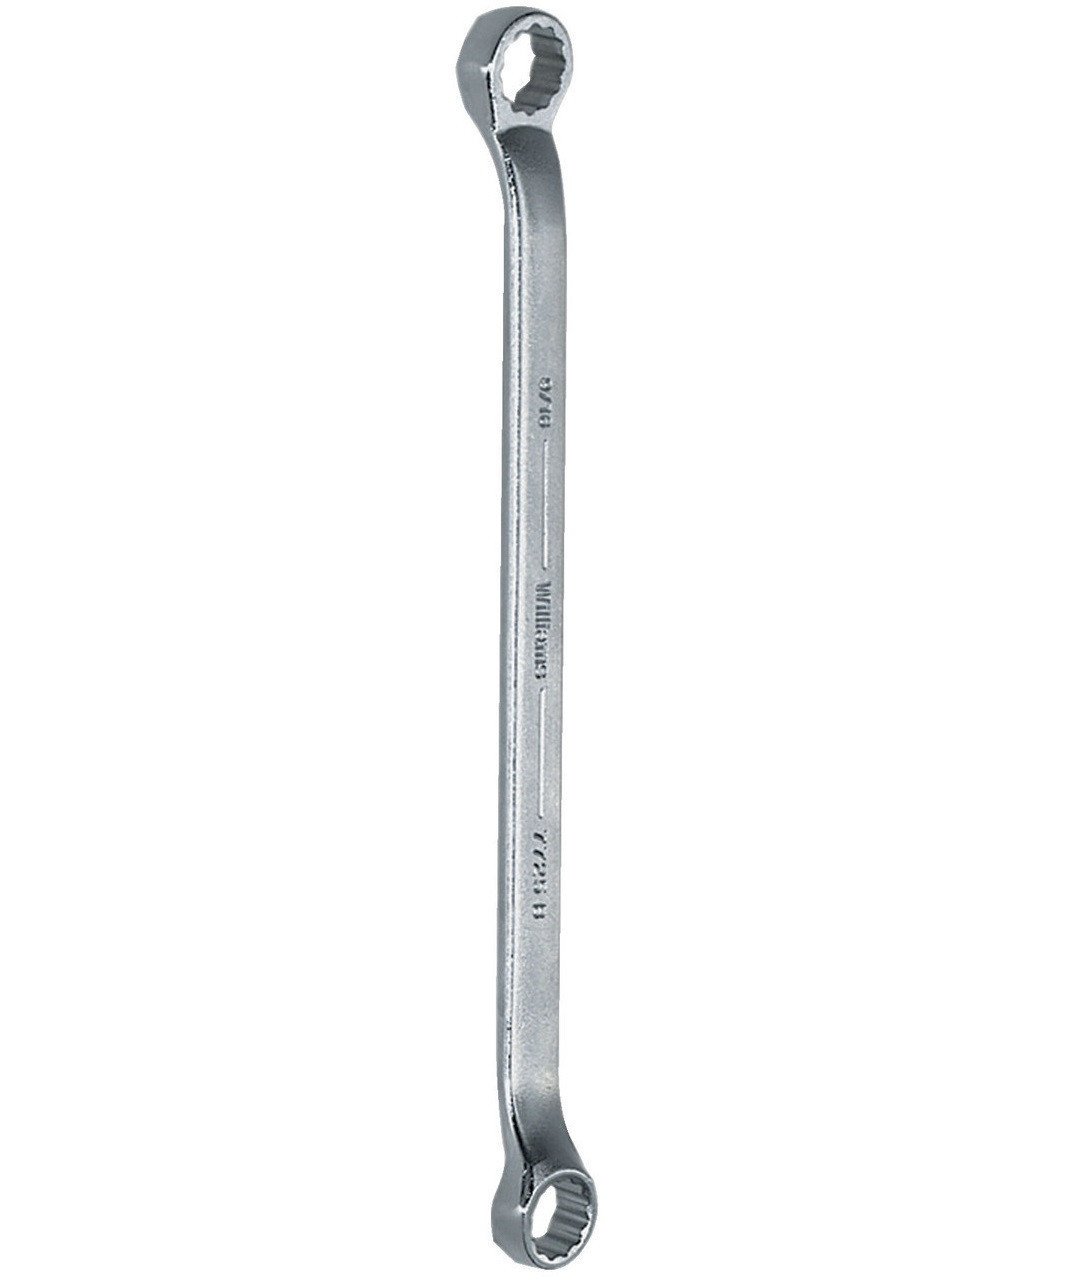 10x12MM Williams Satin Chrome Double Head 10 Degree Offset Box End Wrench 12 PT - JHWBWM-1012